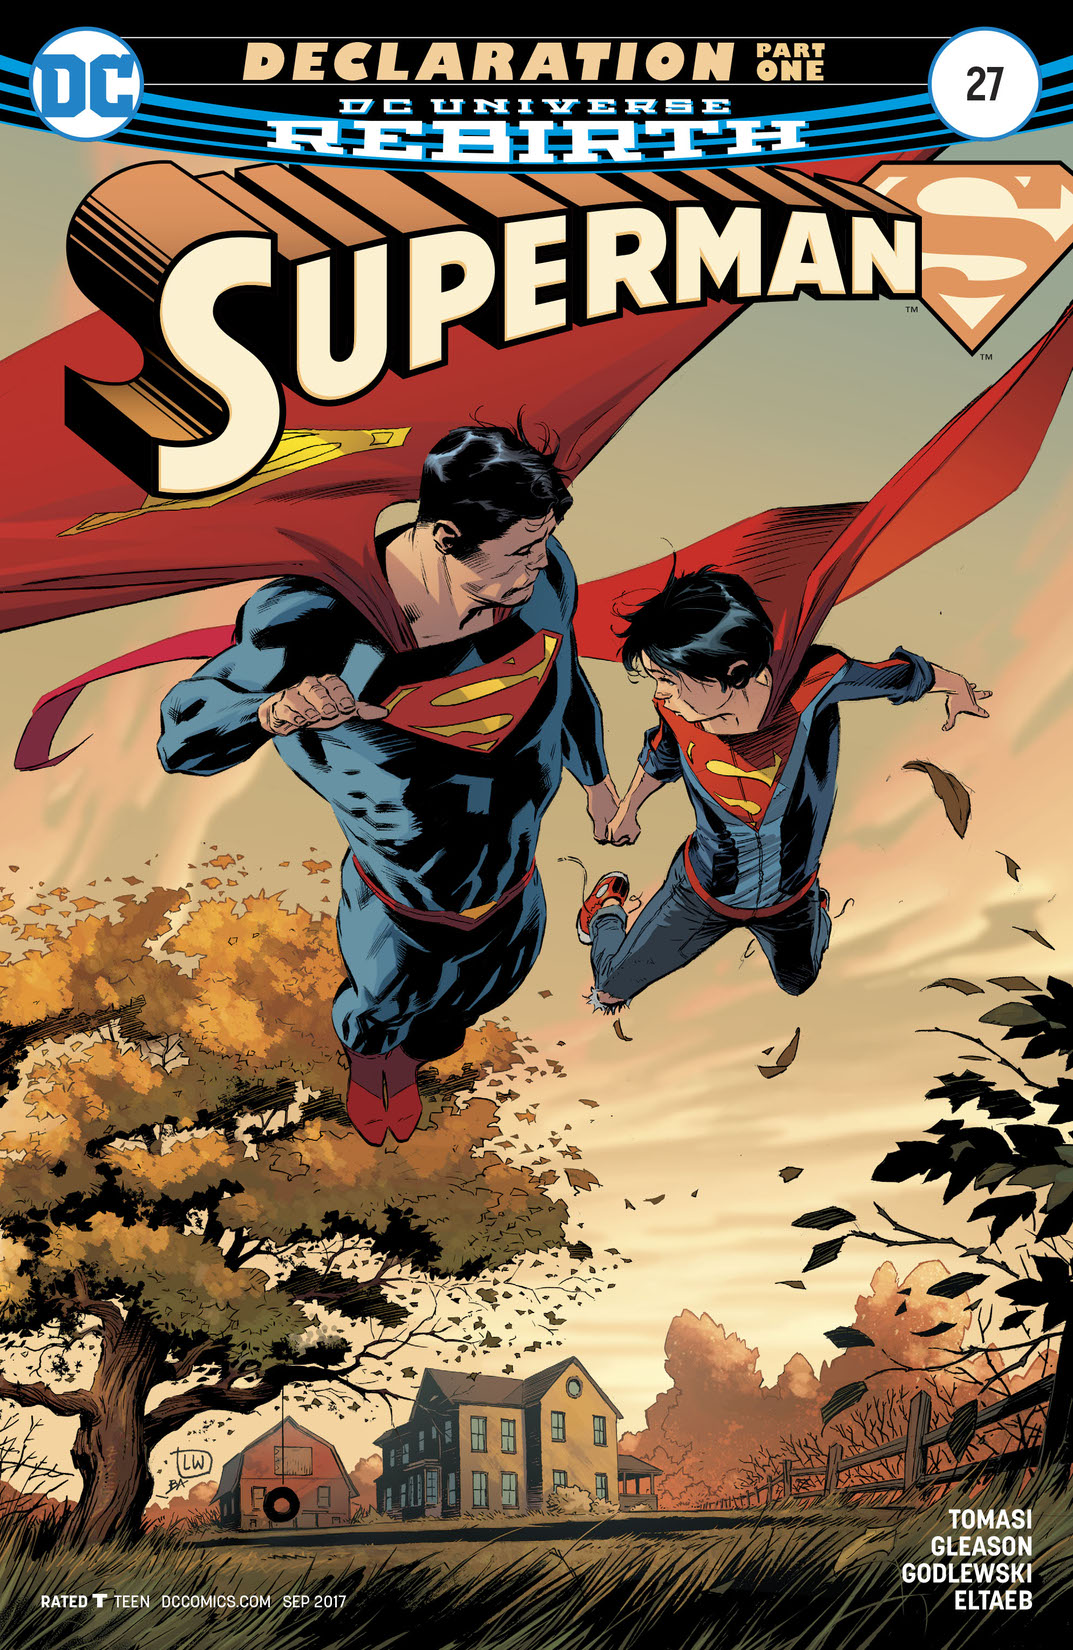 Superman (2016-) #27 preview images